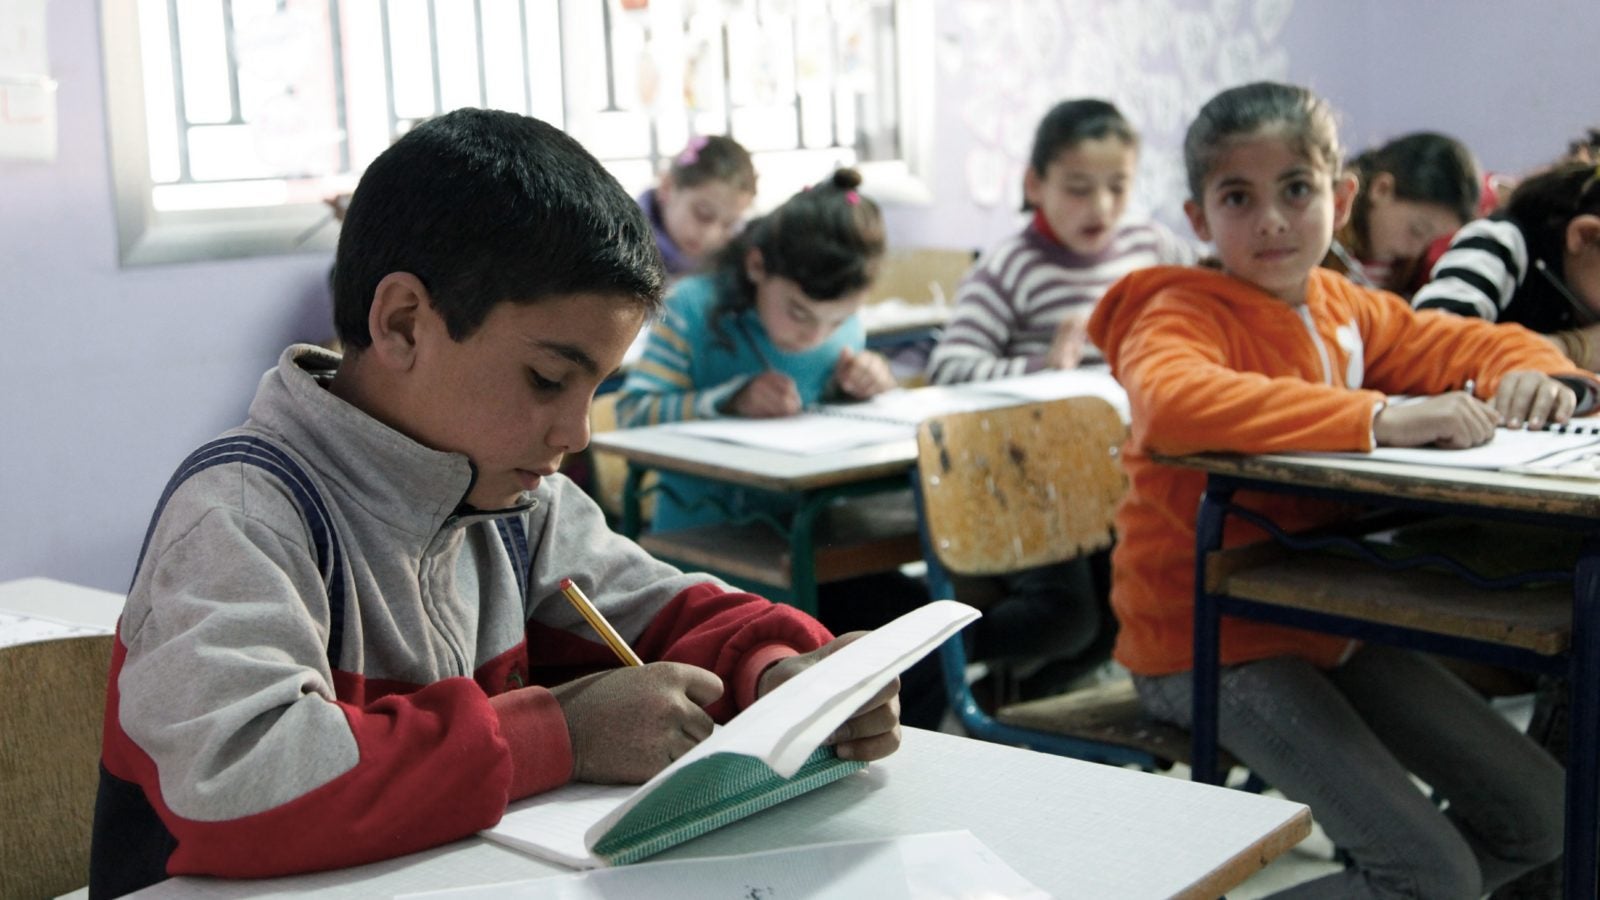 A Syrian student writes in a book in a classroom